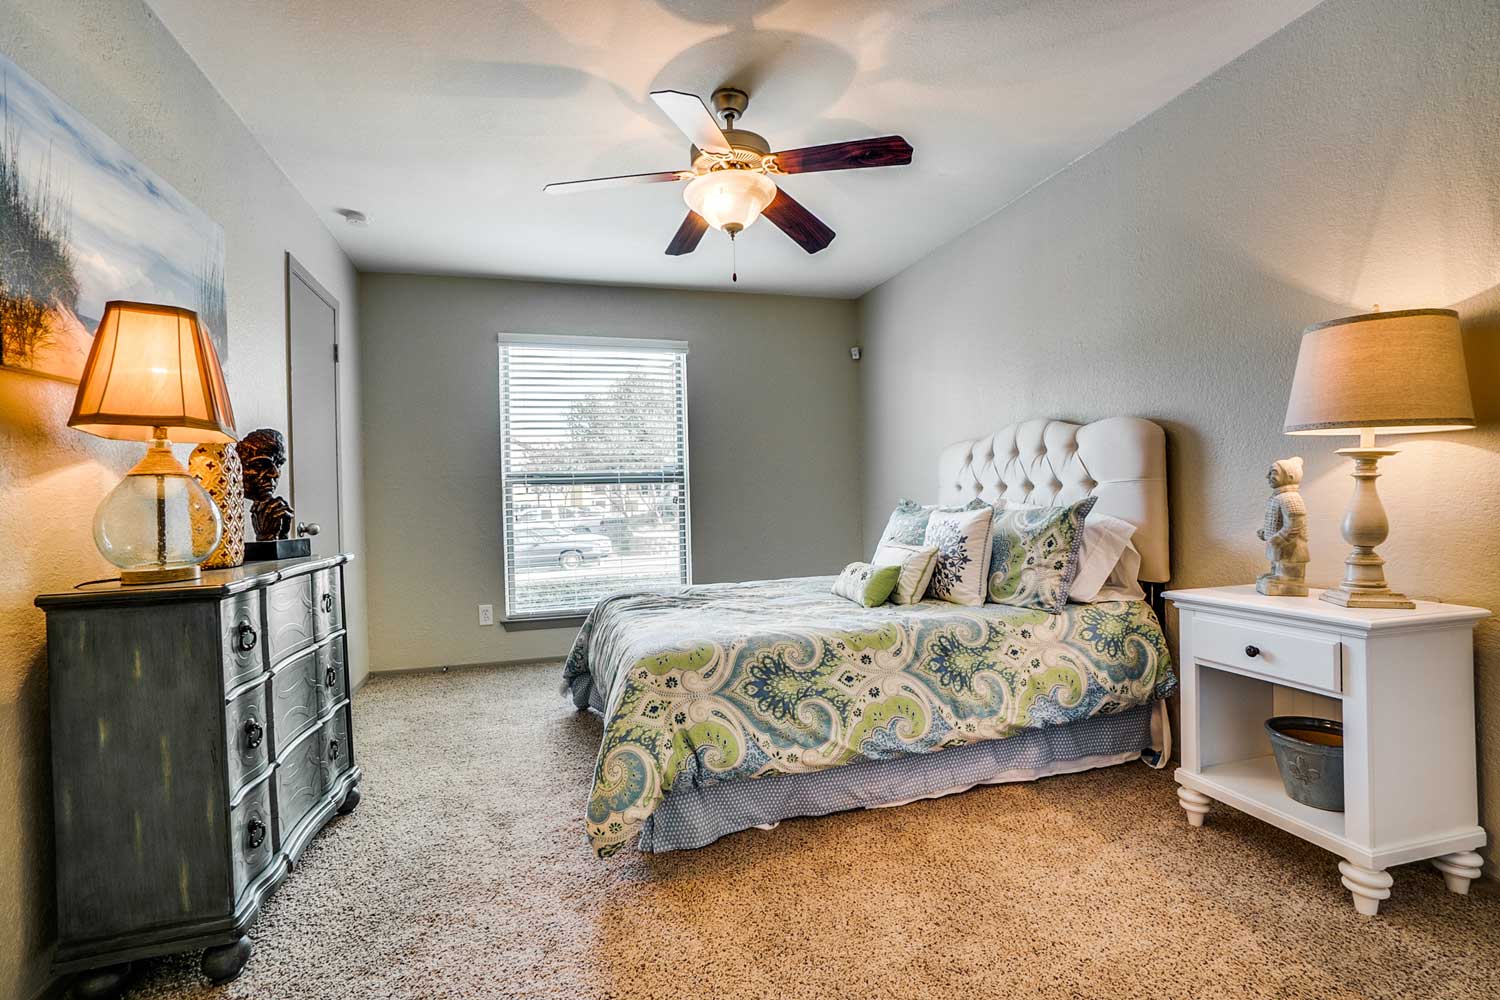 Ceiling Fans at Riviera Apartments in Dallas, Texas